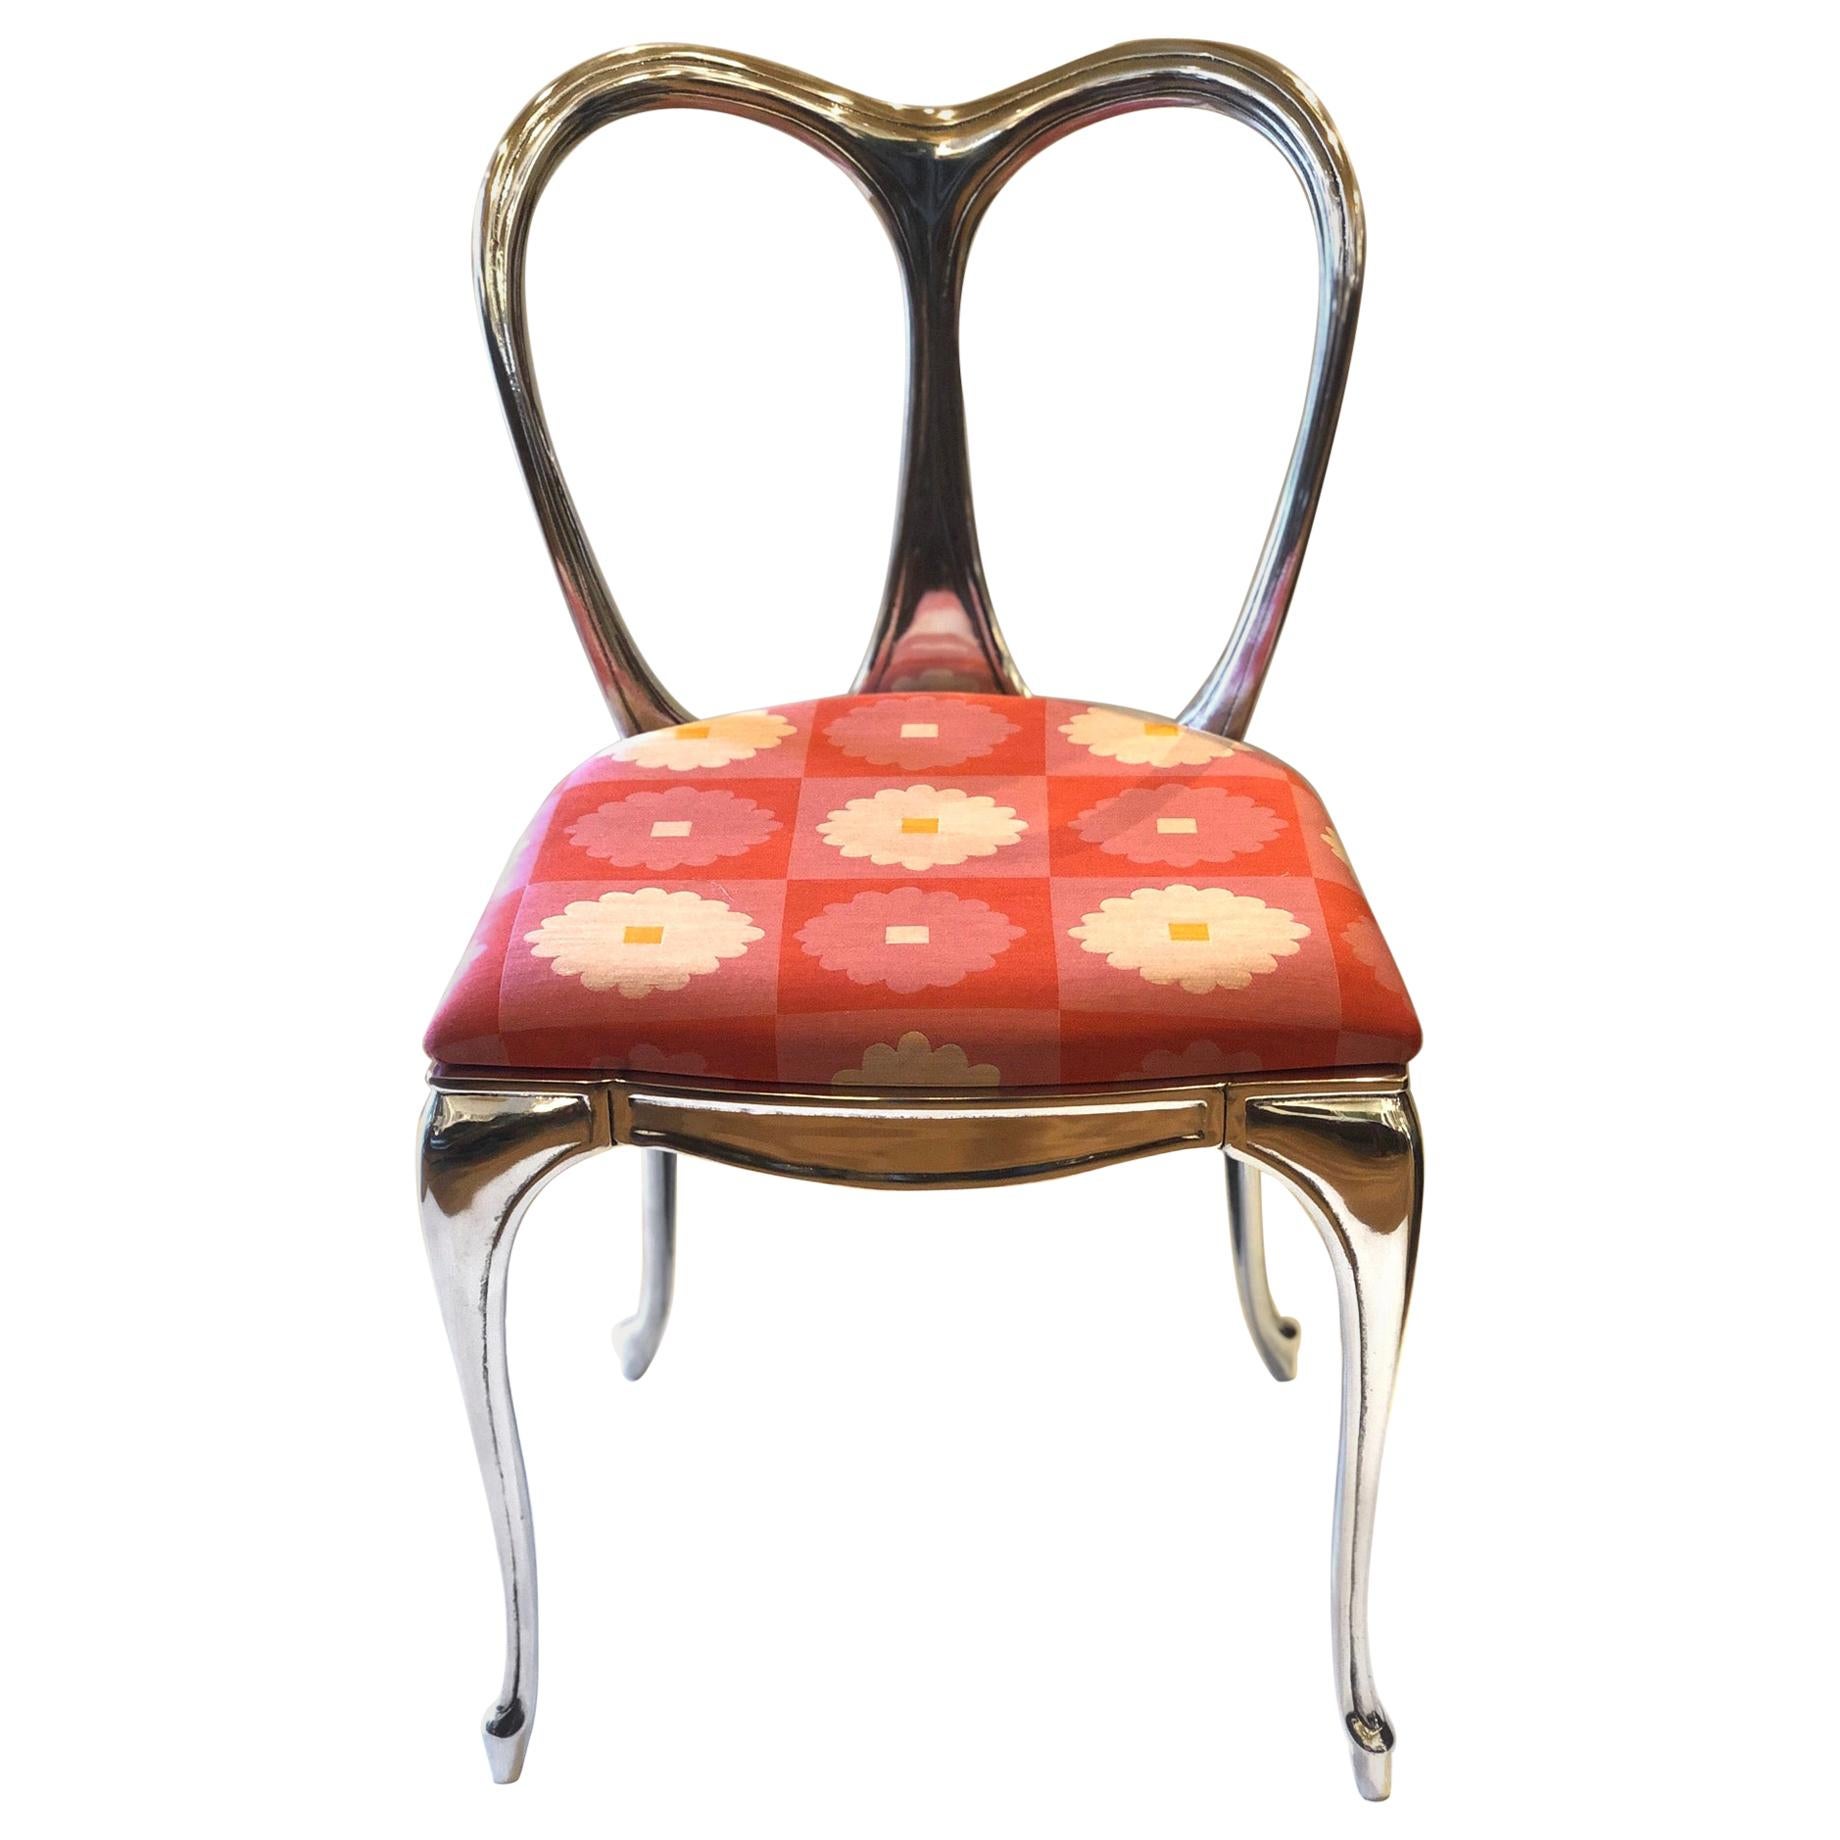 One of a Kind Vanity Chair in Polished Cast Aluminum Art Nouveau Style